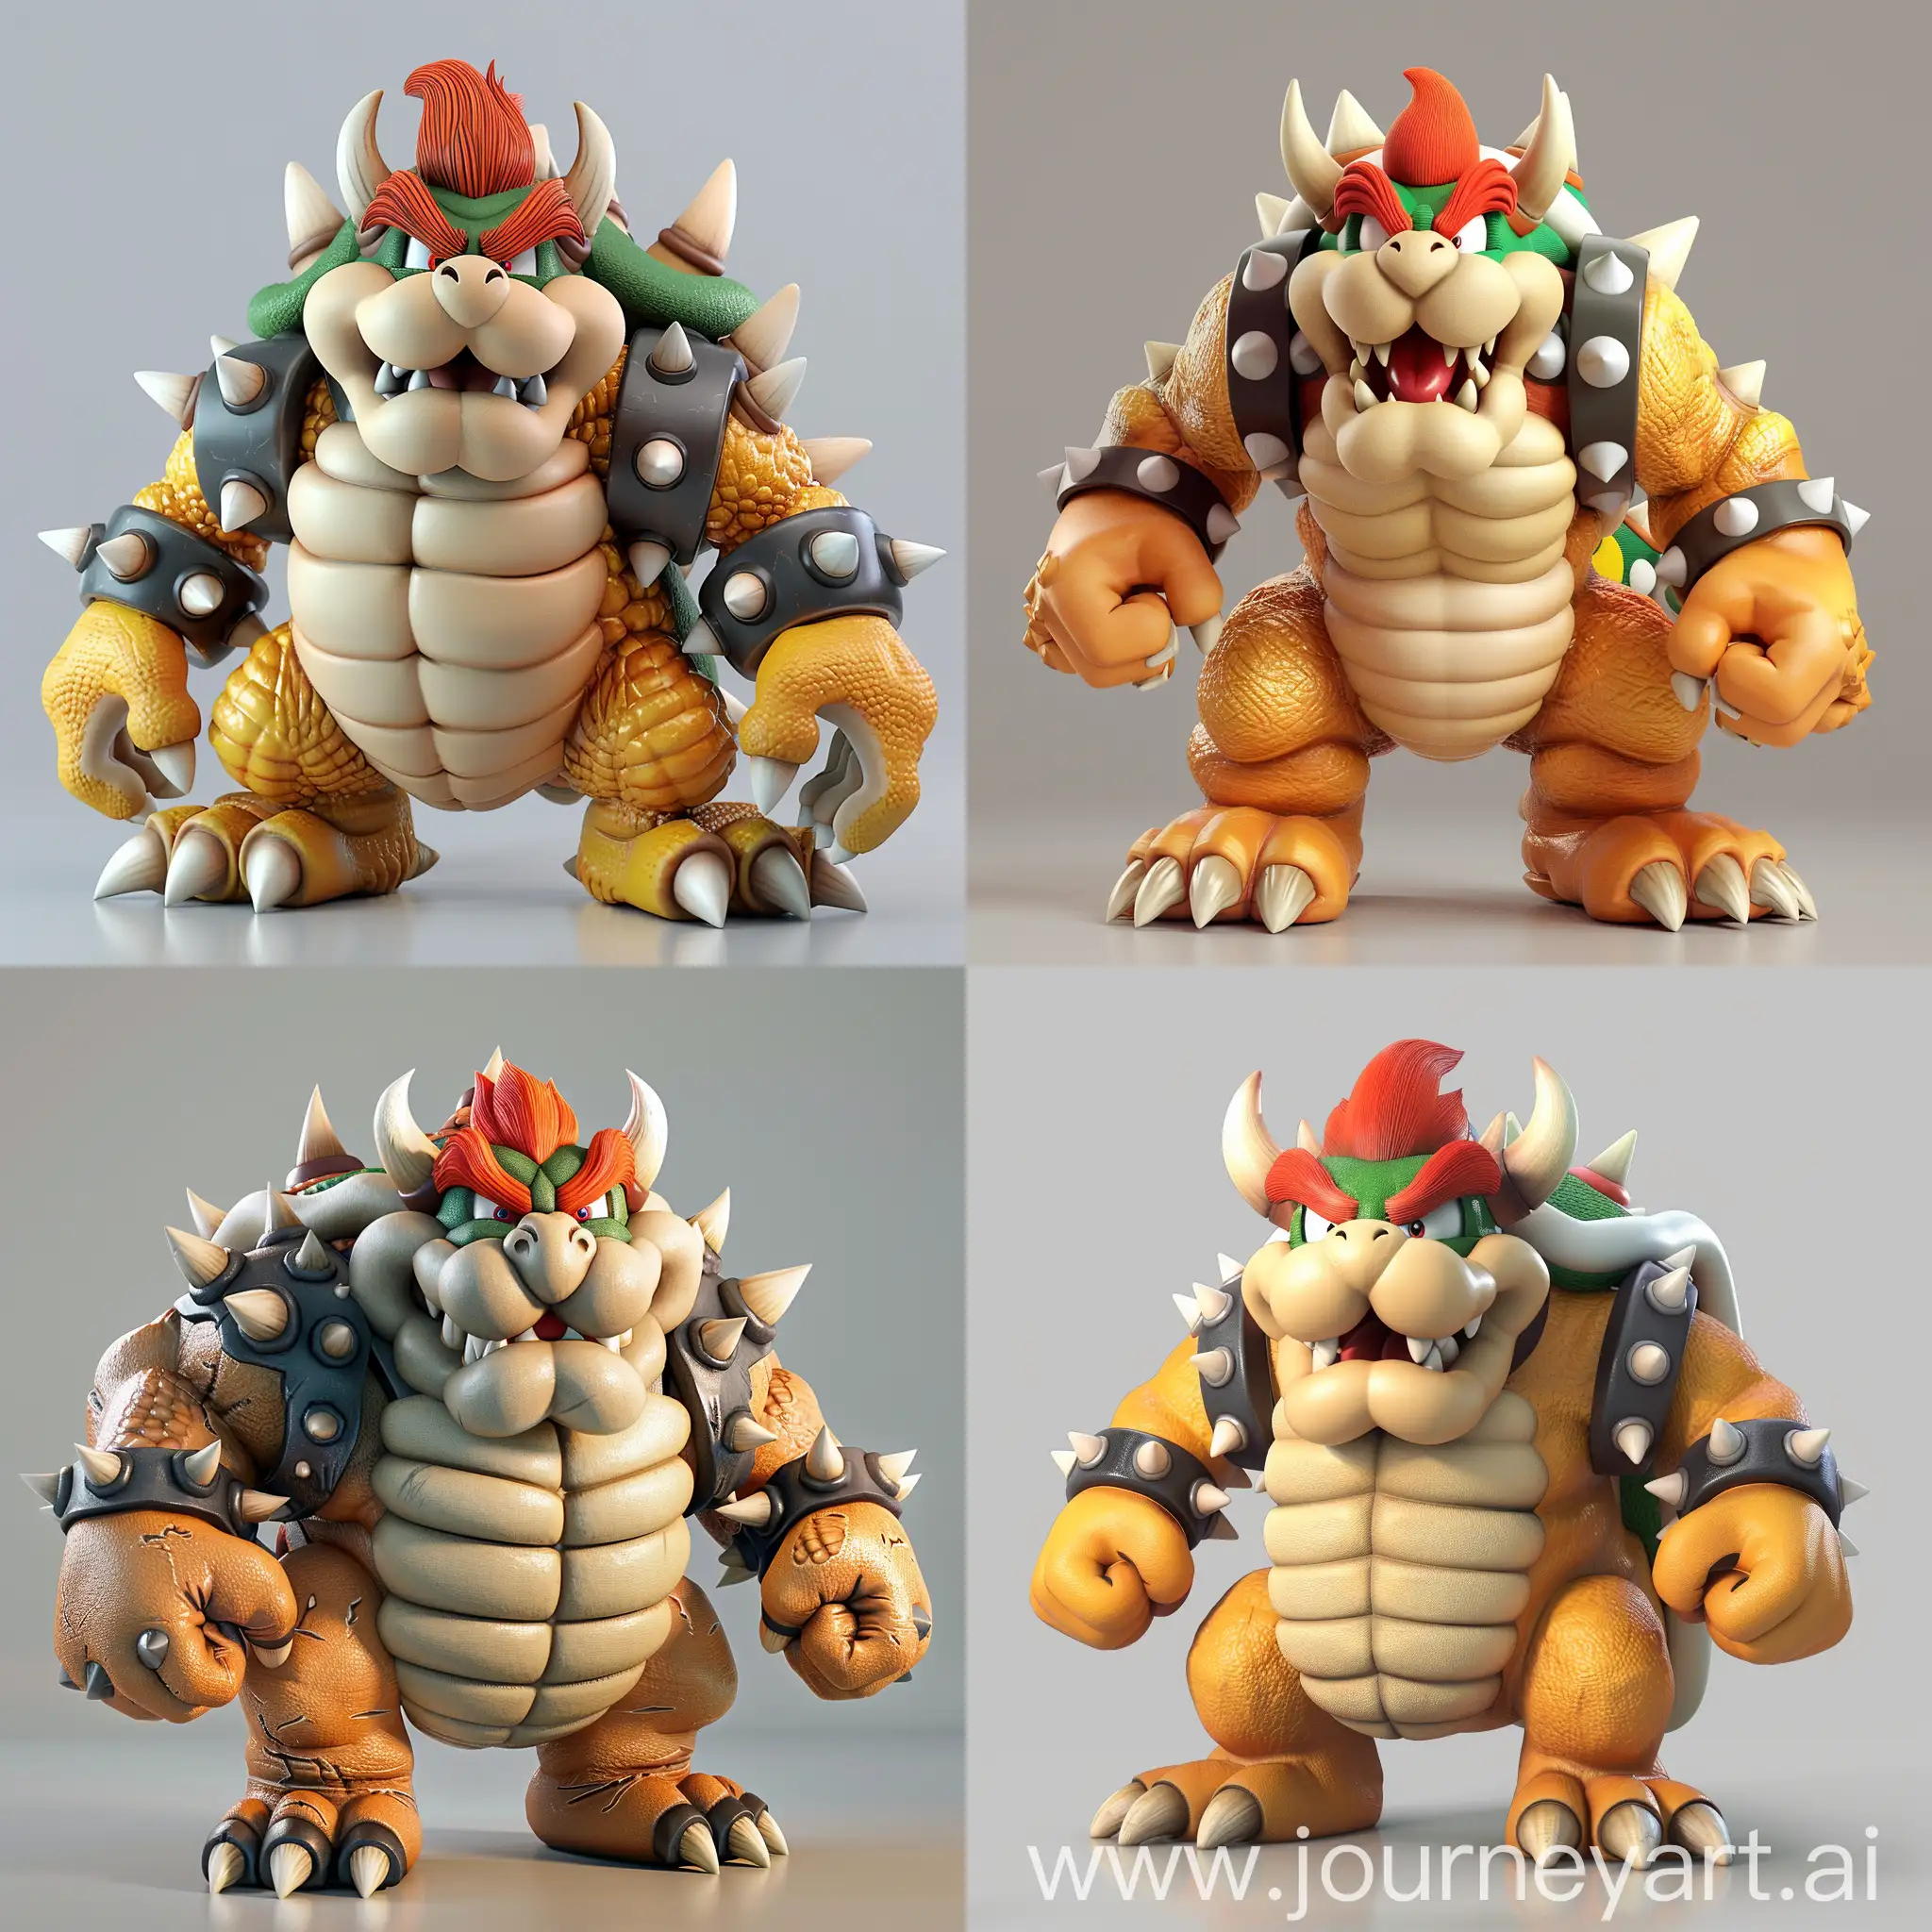 Bowser-Strikes-a-Fierce-Pose-in-Super-Mario-Bros-3D-Character-Rendering